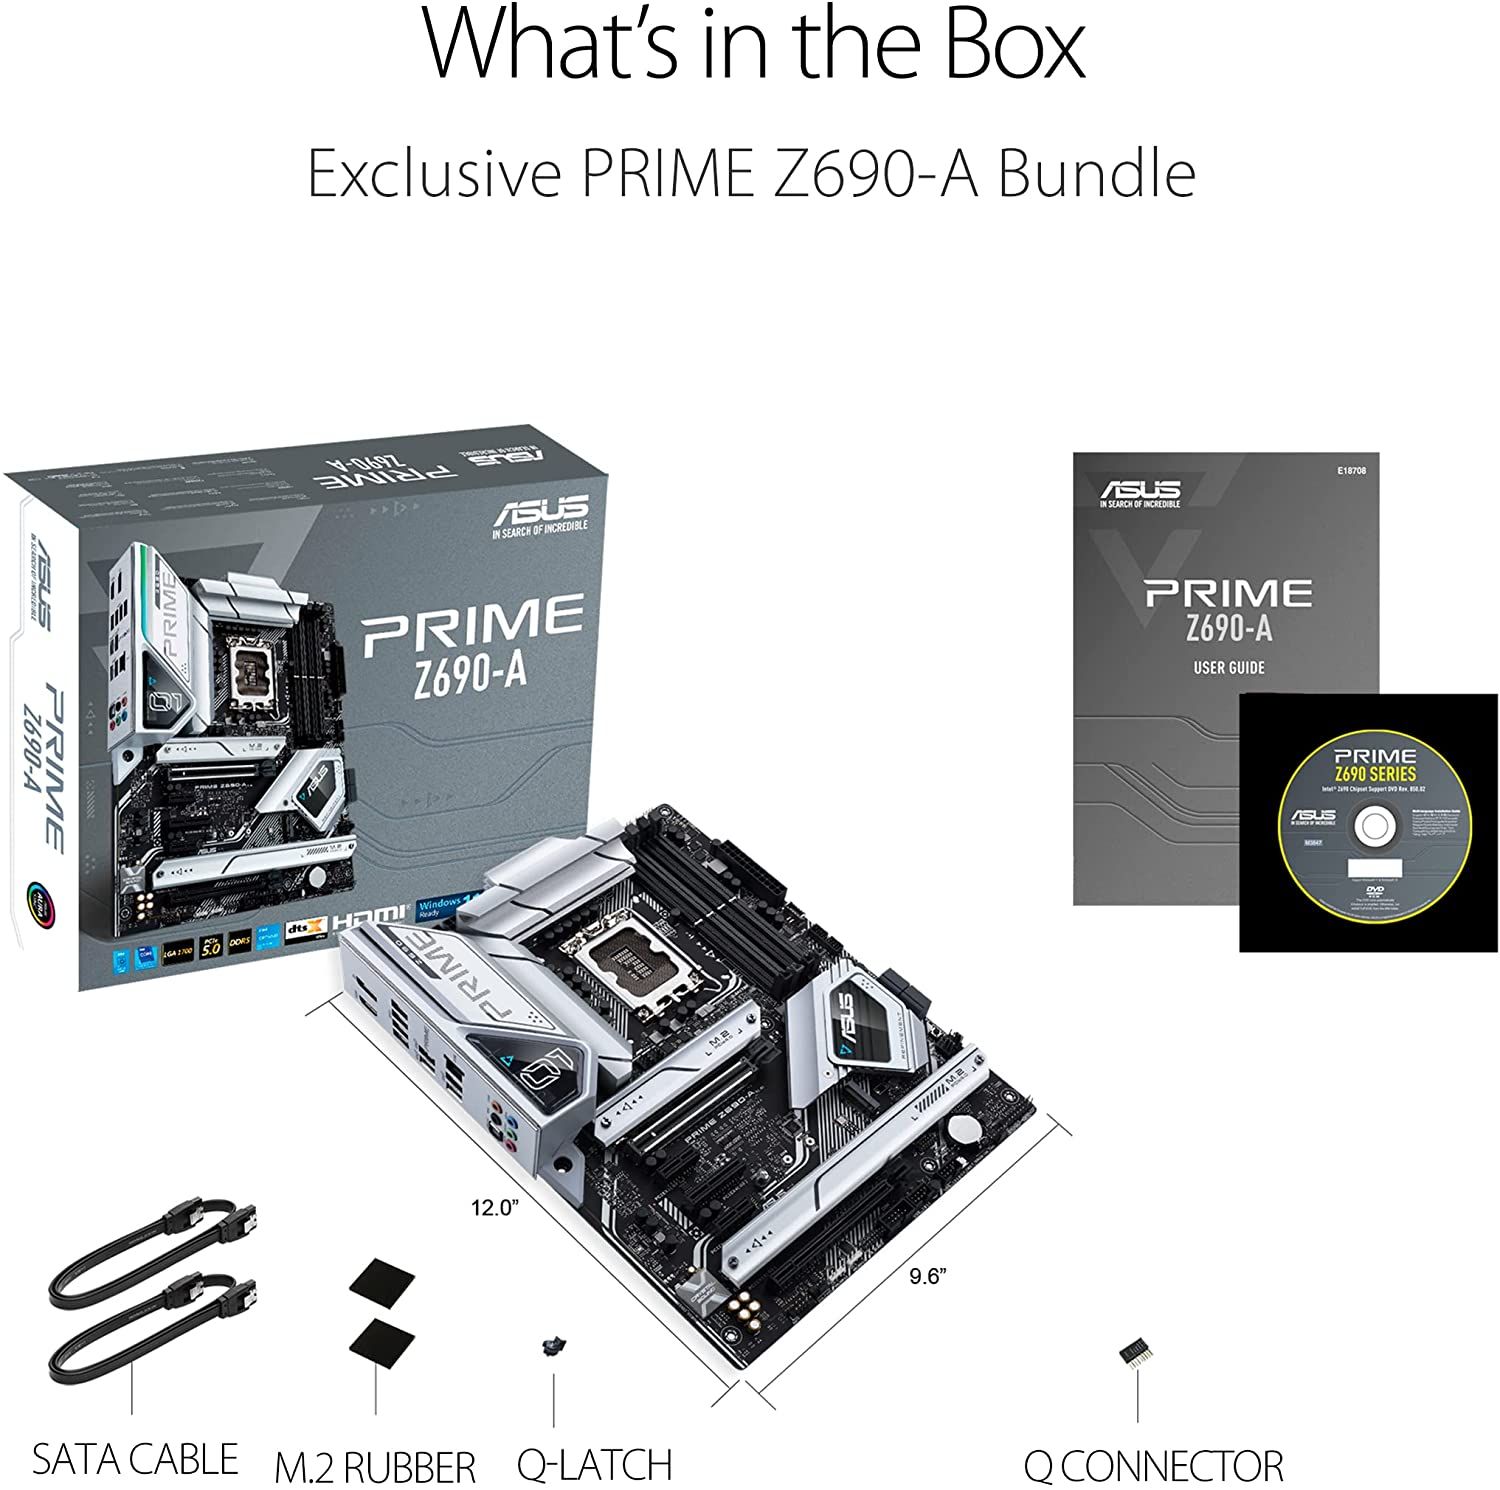 An image showing in-box content of ASUS Prime Z690-A